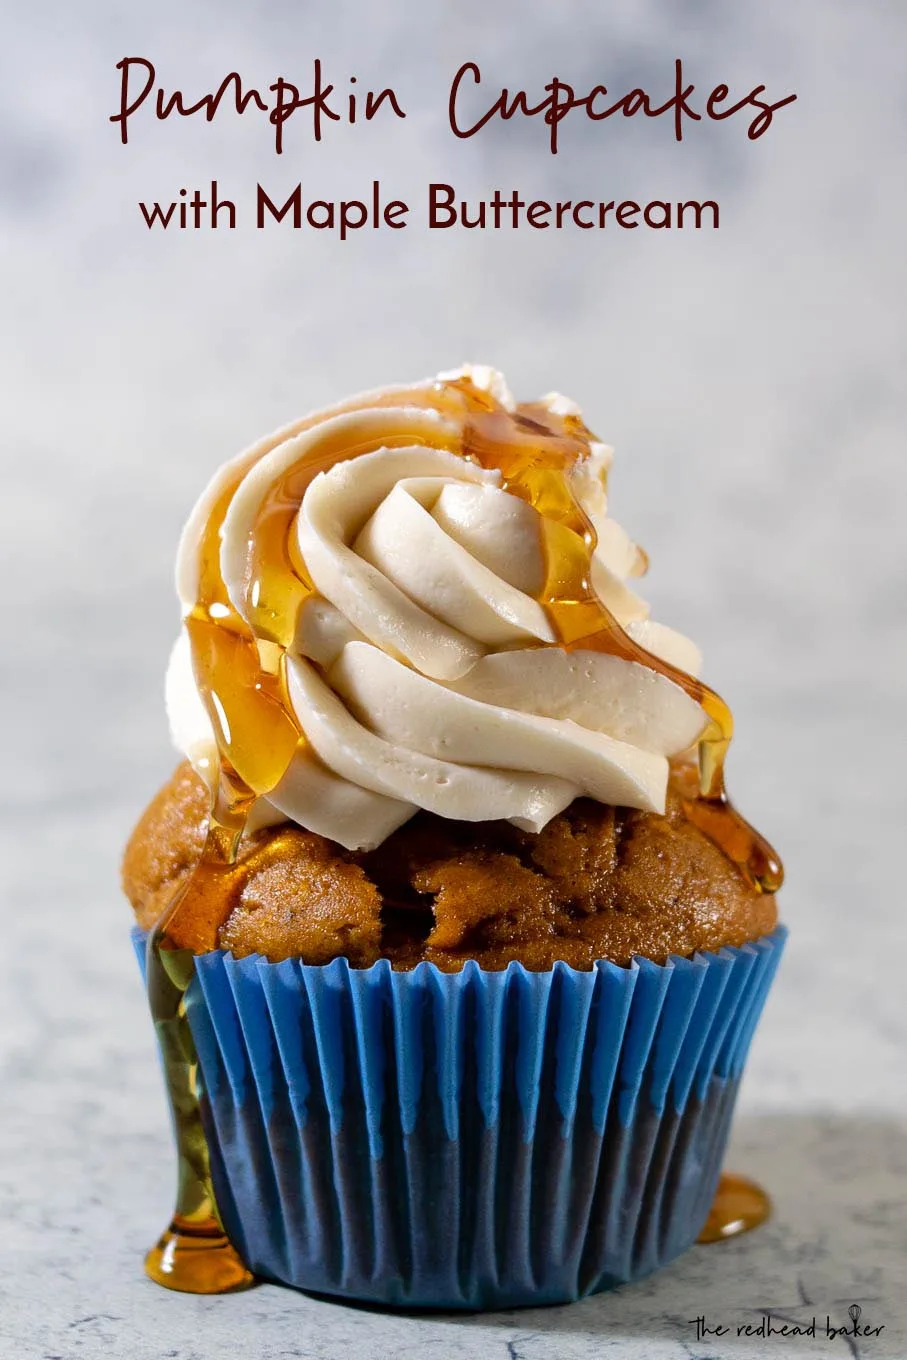 A close-up shot of a pumpkin cupcake with maple syrup dripping down the frosting